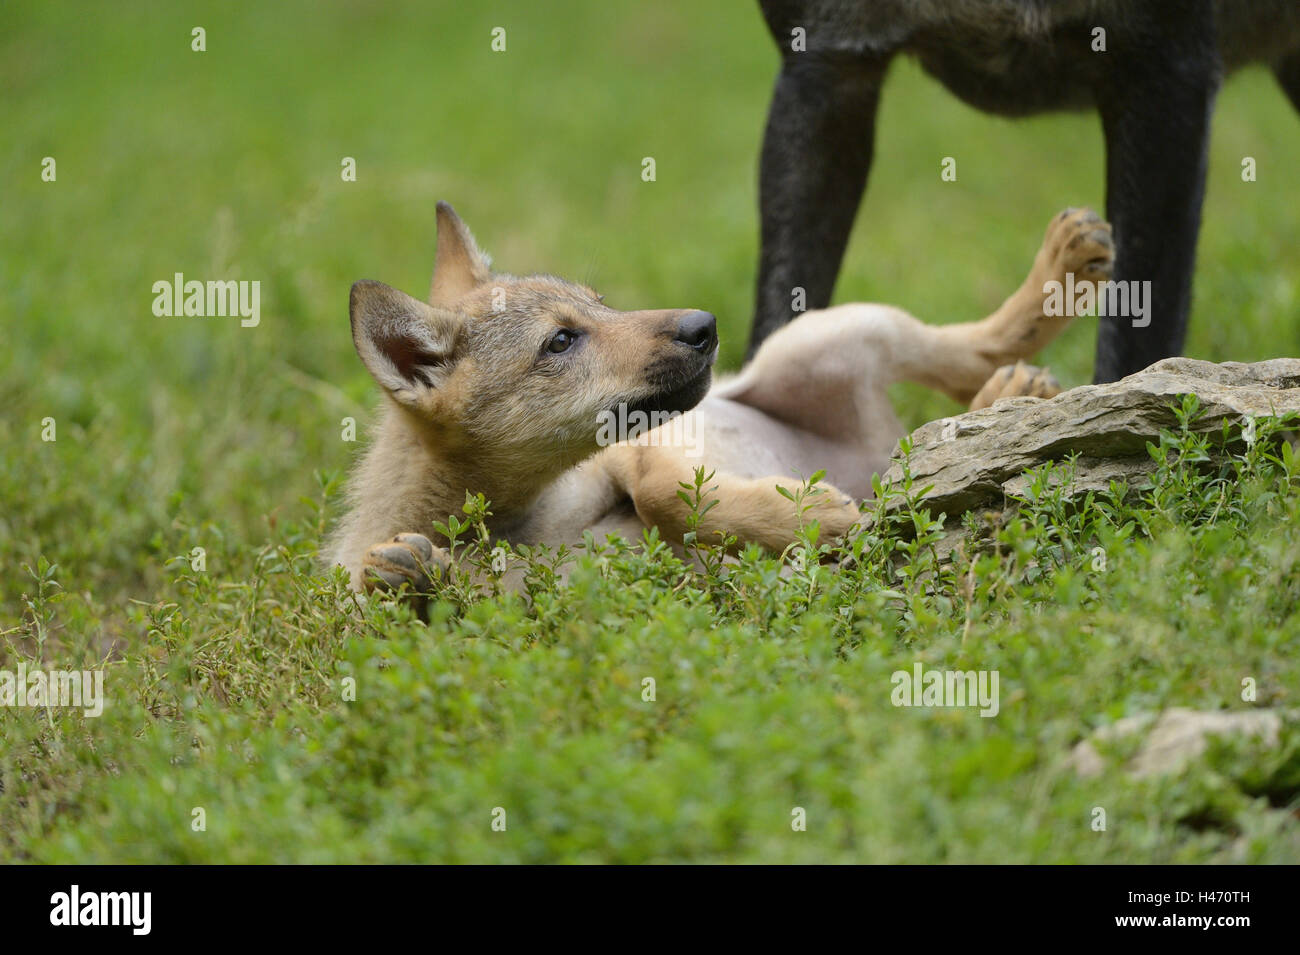 Eastern timber wolf, Canis lupus lycaon, puppy, meadow, lying, Stock Photo